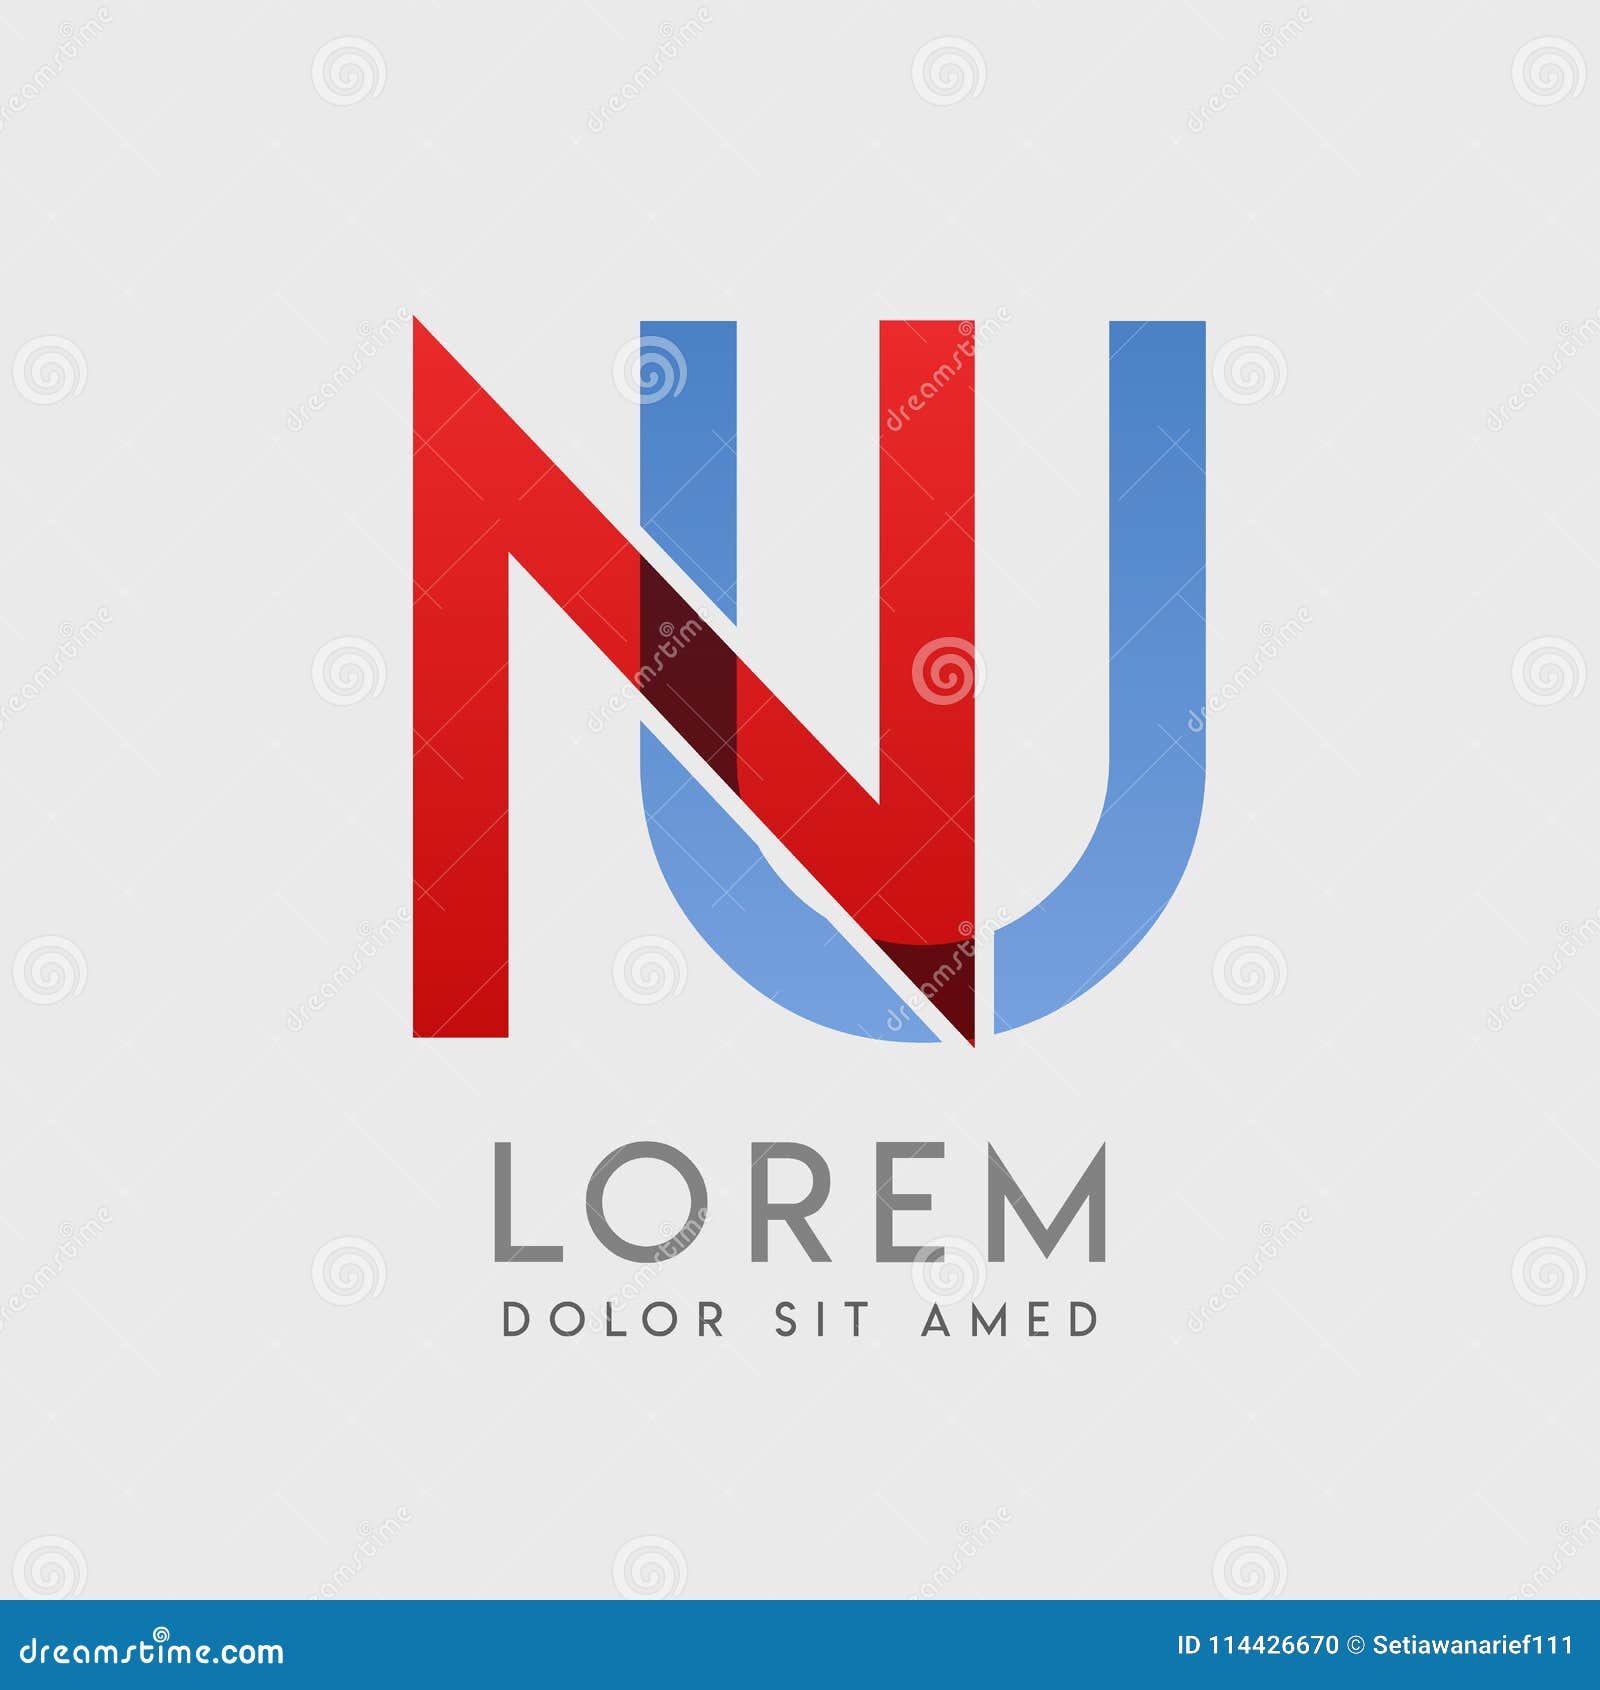 nu logo letters with blue and red gradation